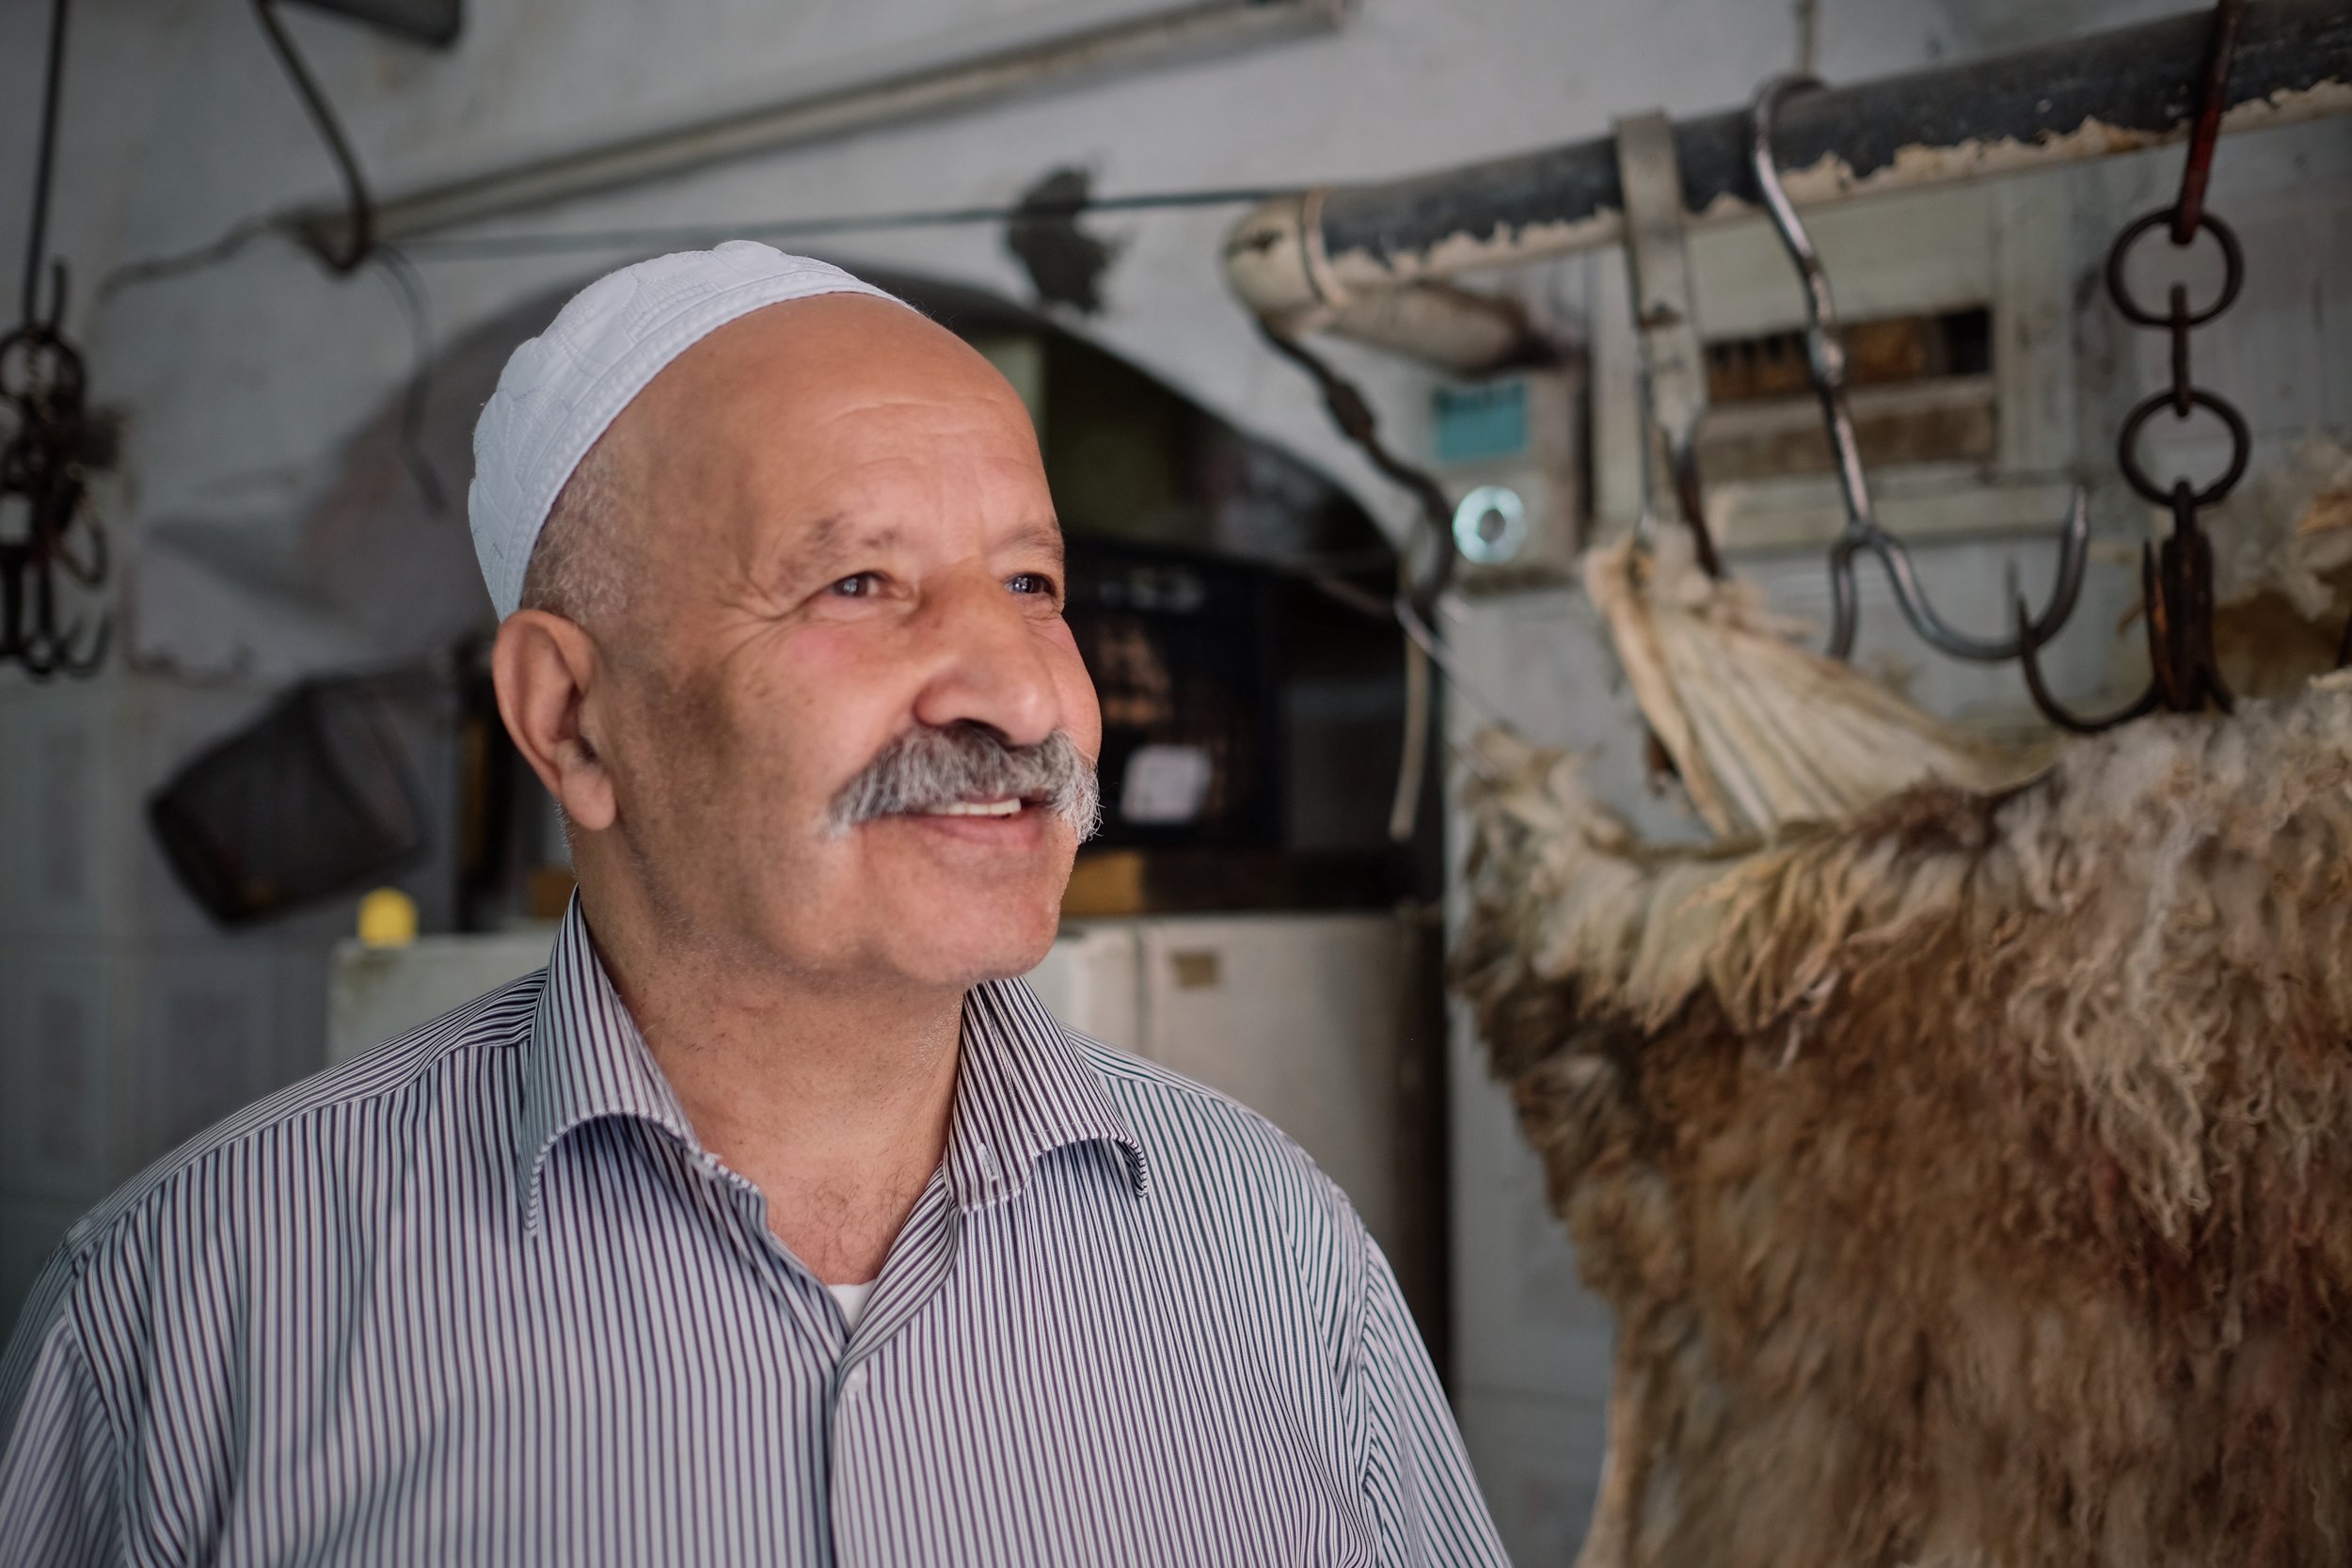  Abu Hilme, 66, in Nablus - From a series of portraits commemorating the 50th anniversary of the 1967 War.&nbsp; 